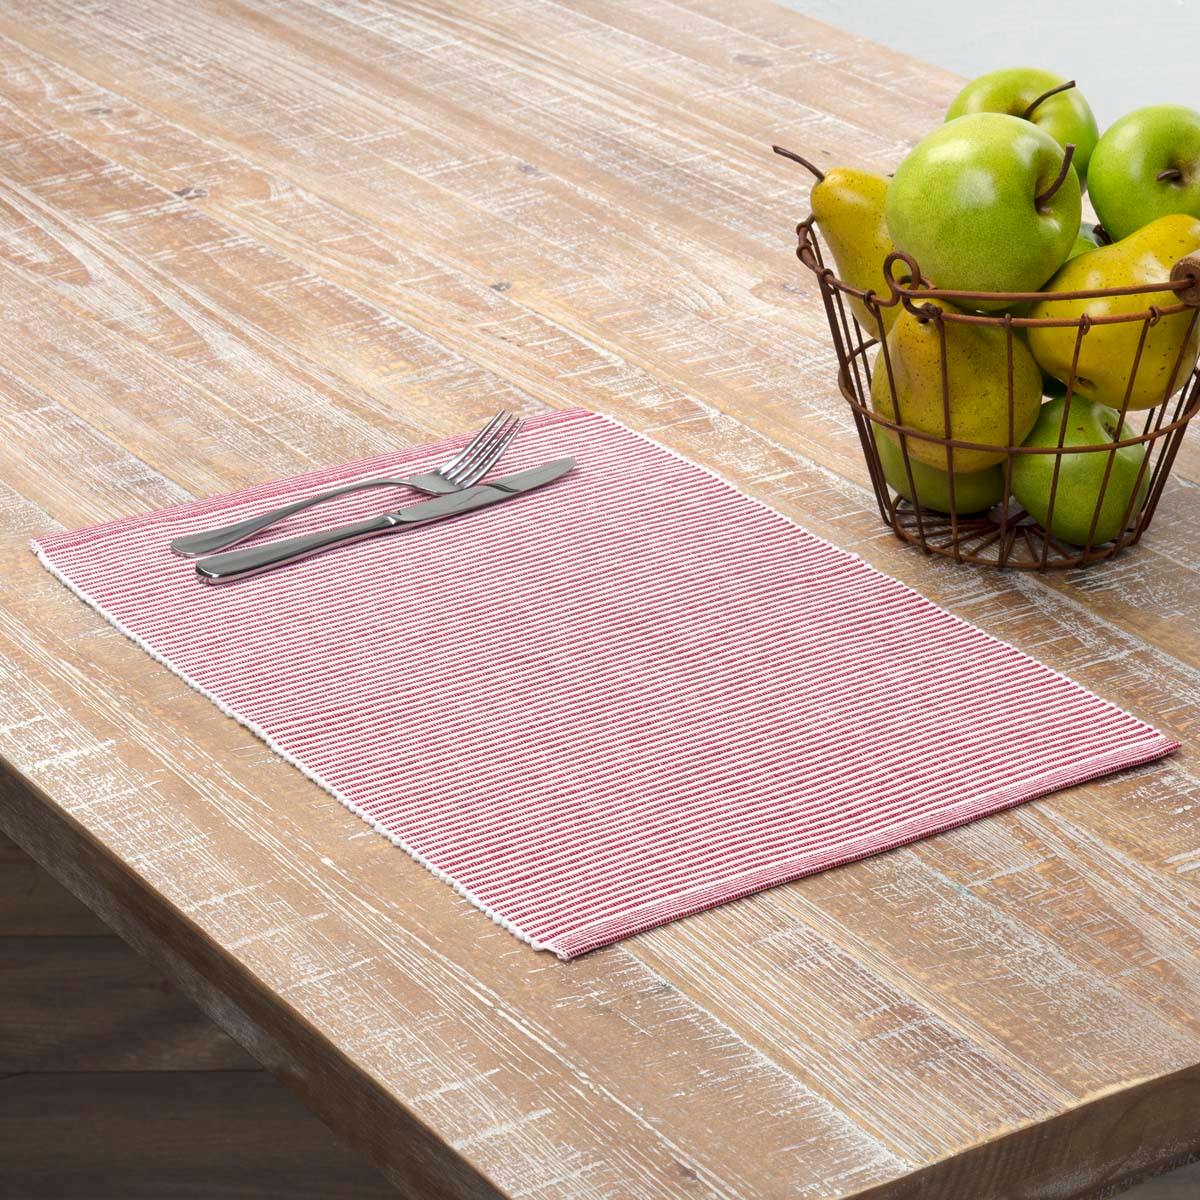 Ashton Red Ribbed Placemat Set of 6 VHC Brands - The Fox Decor